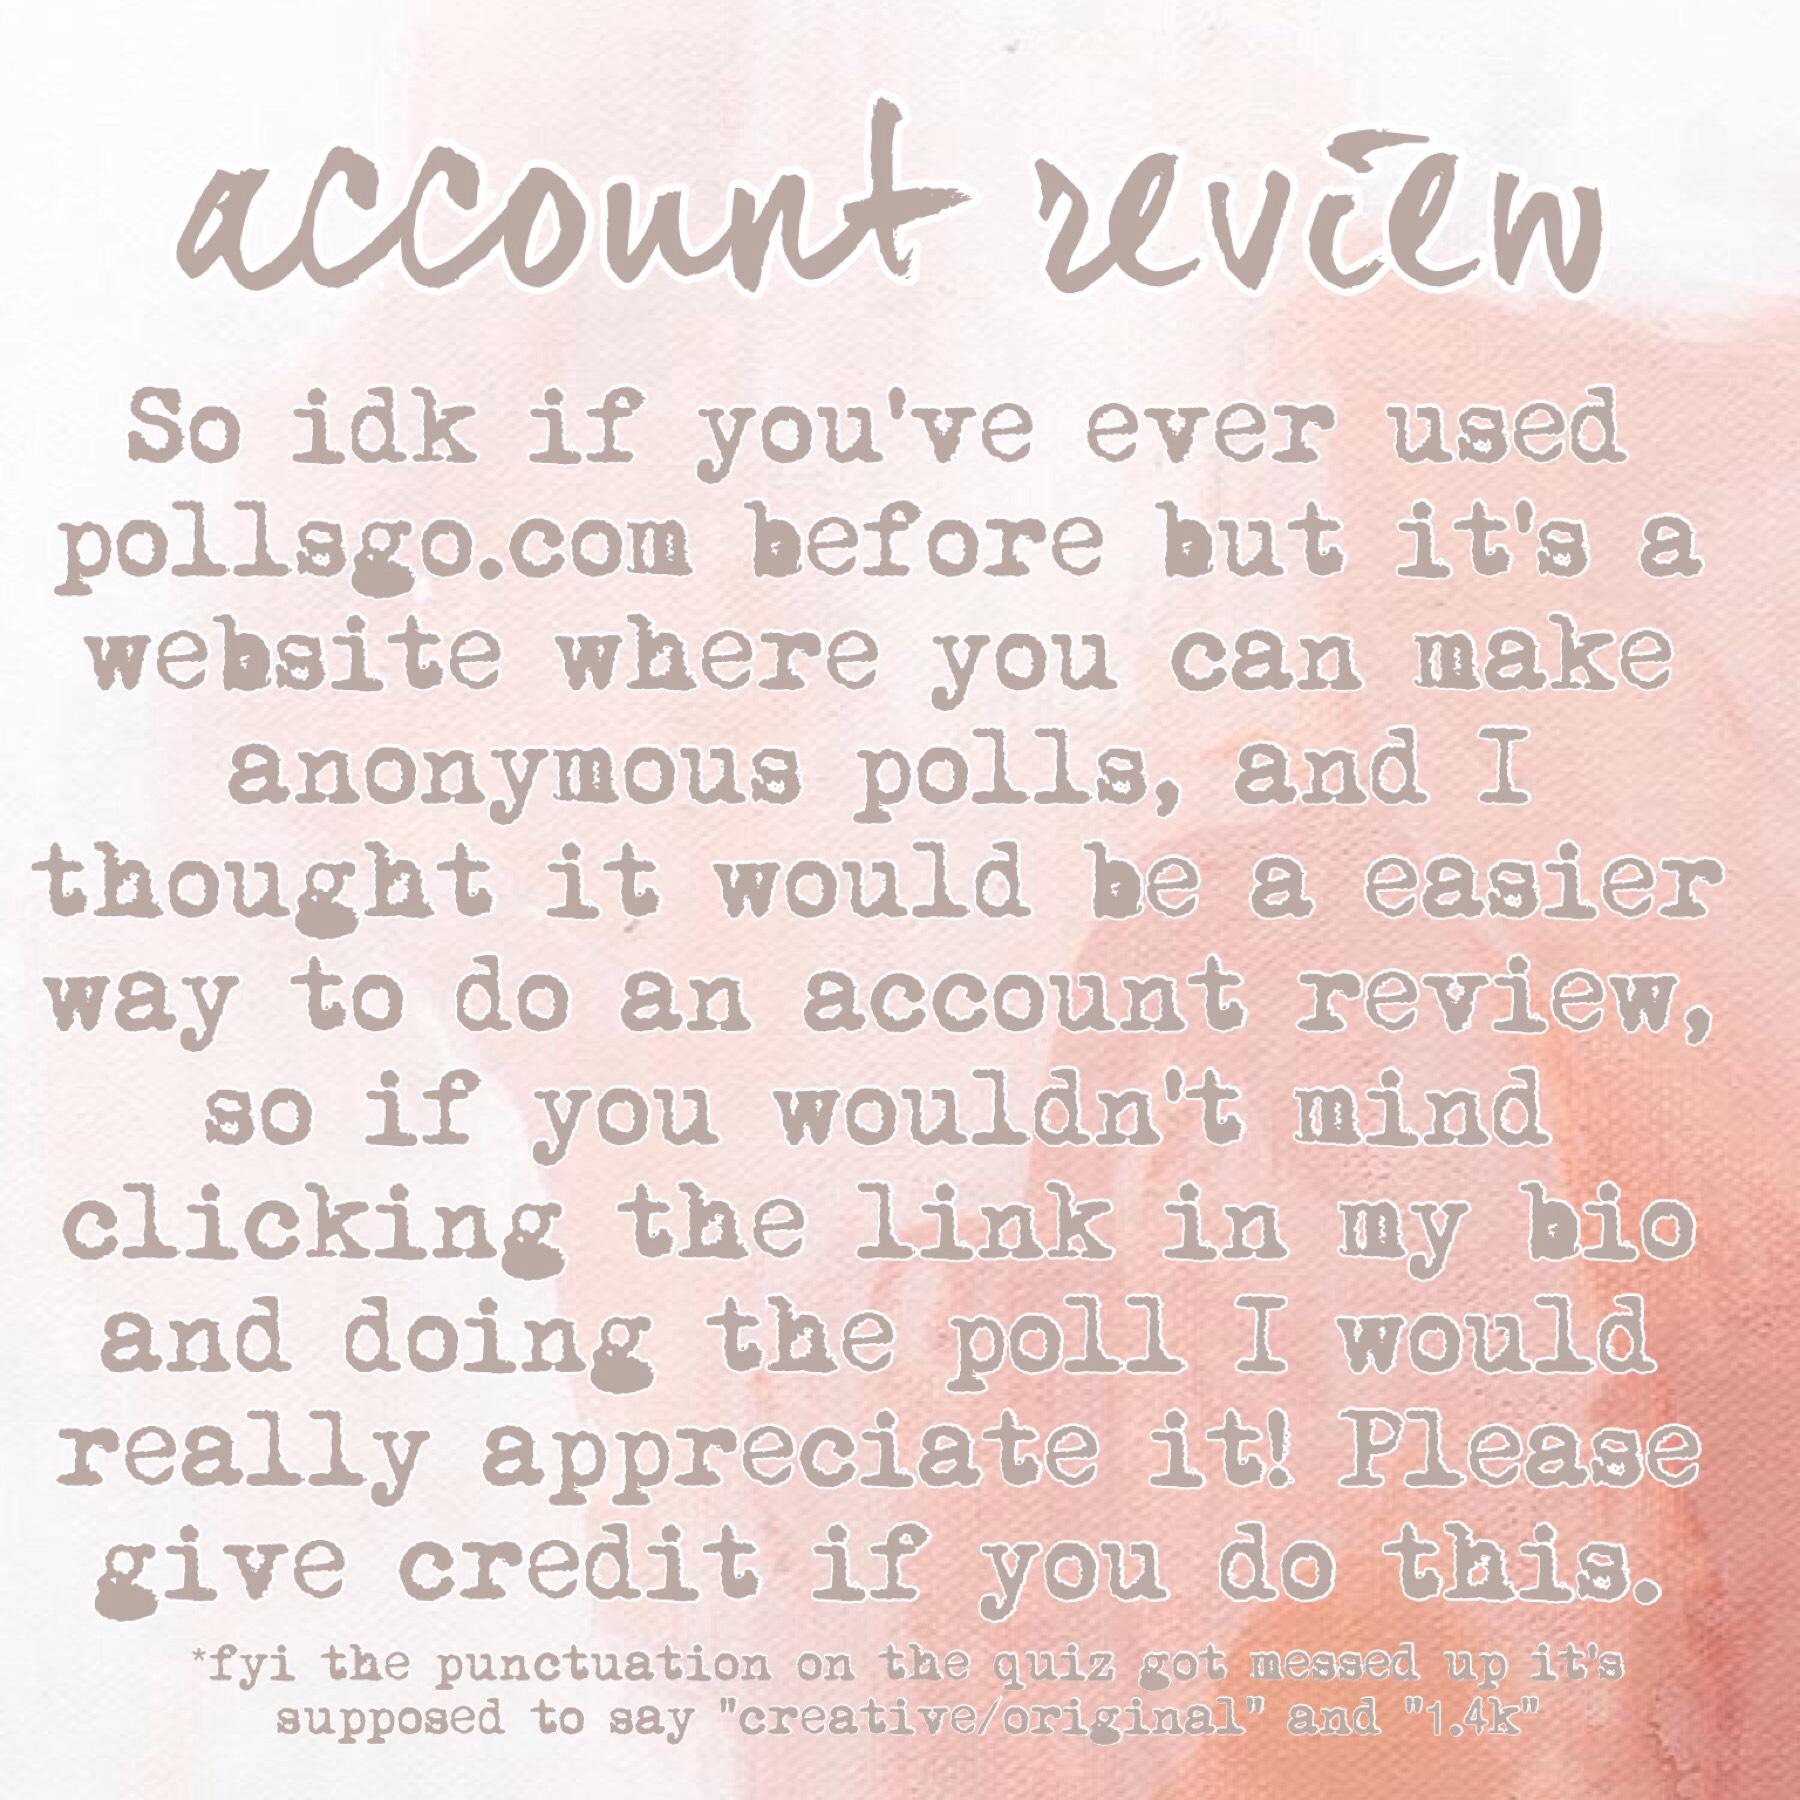 ^plz take account review poll (link in bio)
Oof I post a lot of non-collages, sorry